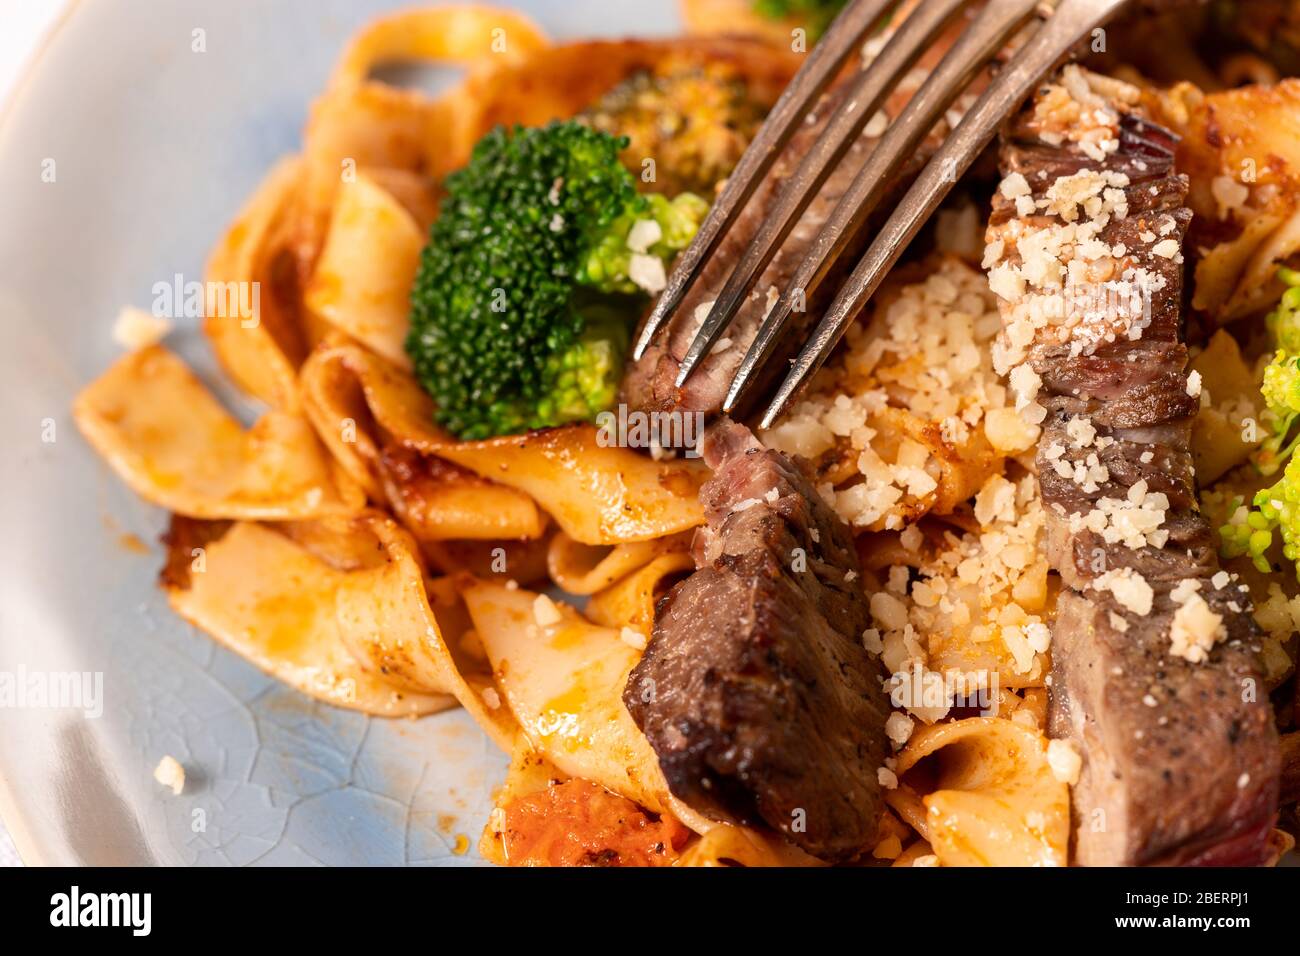 tagliatelli with steak slices on a plate Stock Photo